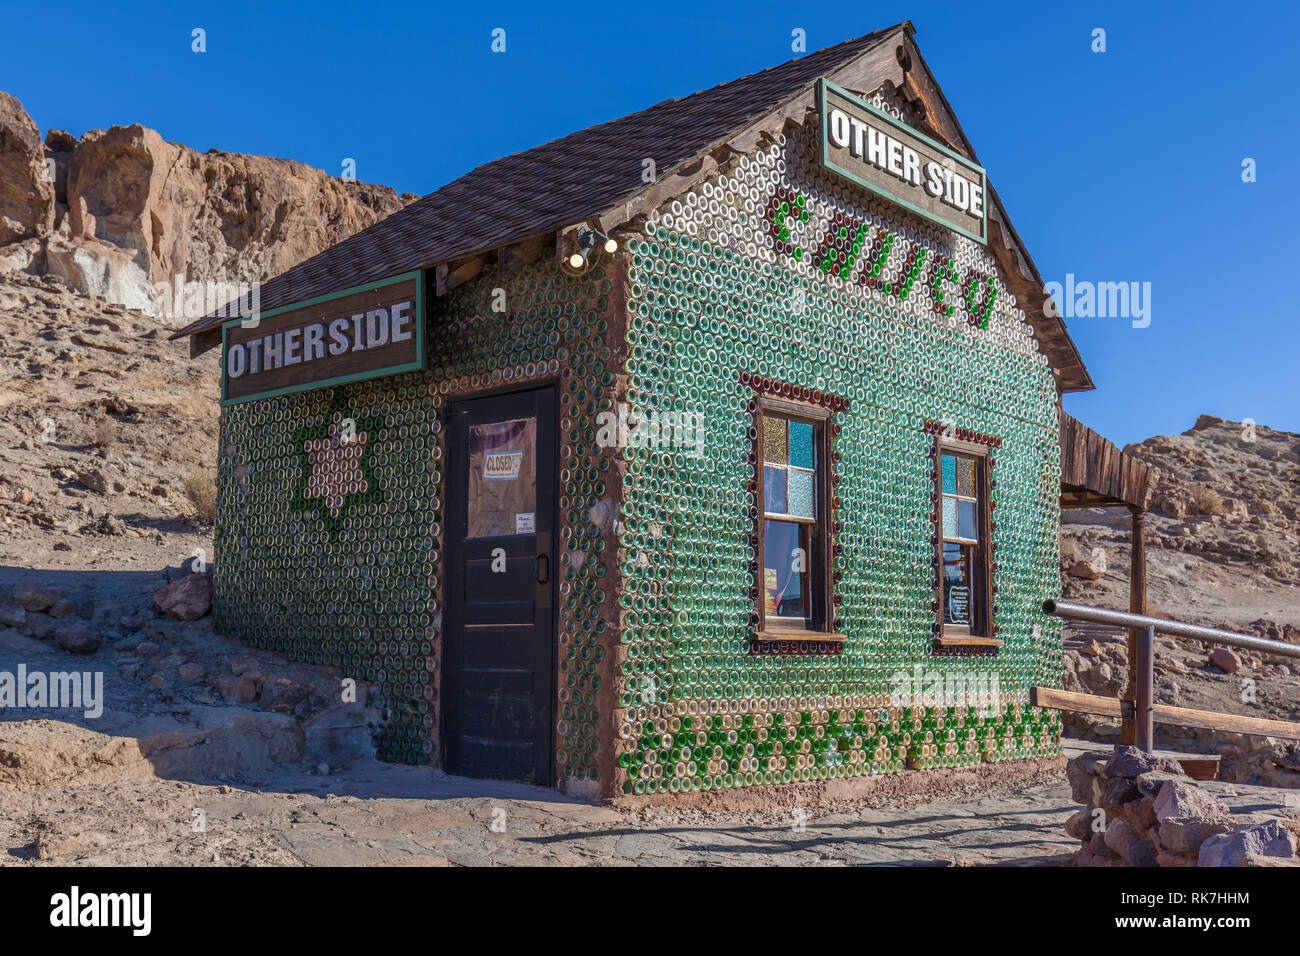 A bottle house in the Calico ghost town in California, Usa. The Calico Bottle House was built after 1951 and built with more than 5,000 bottles. Stock Photo